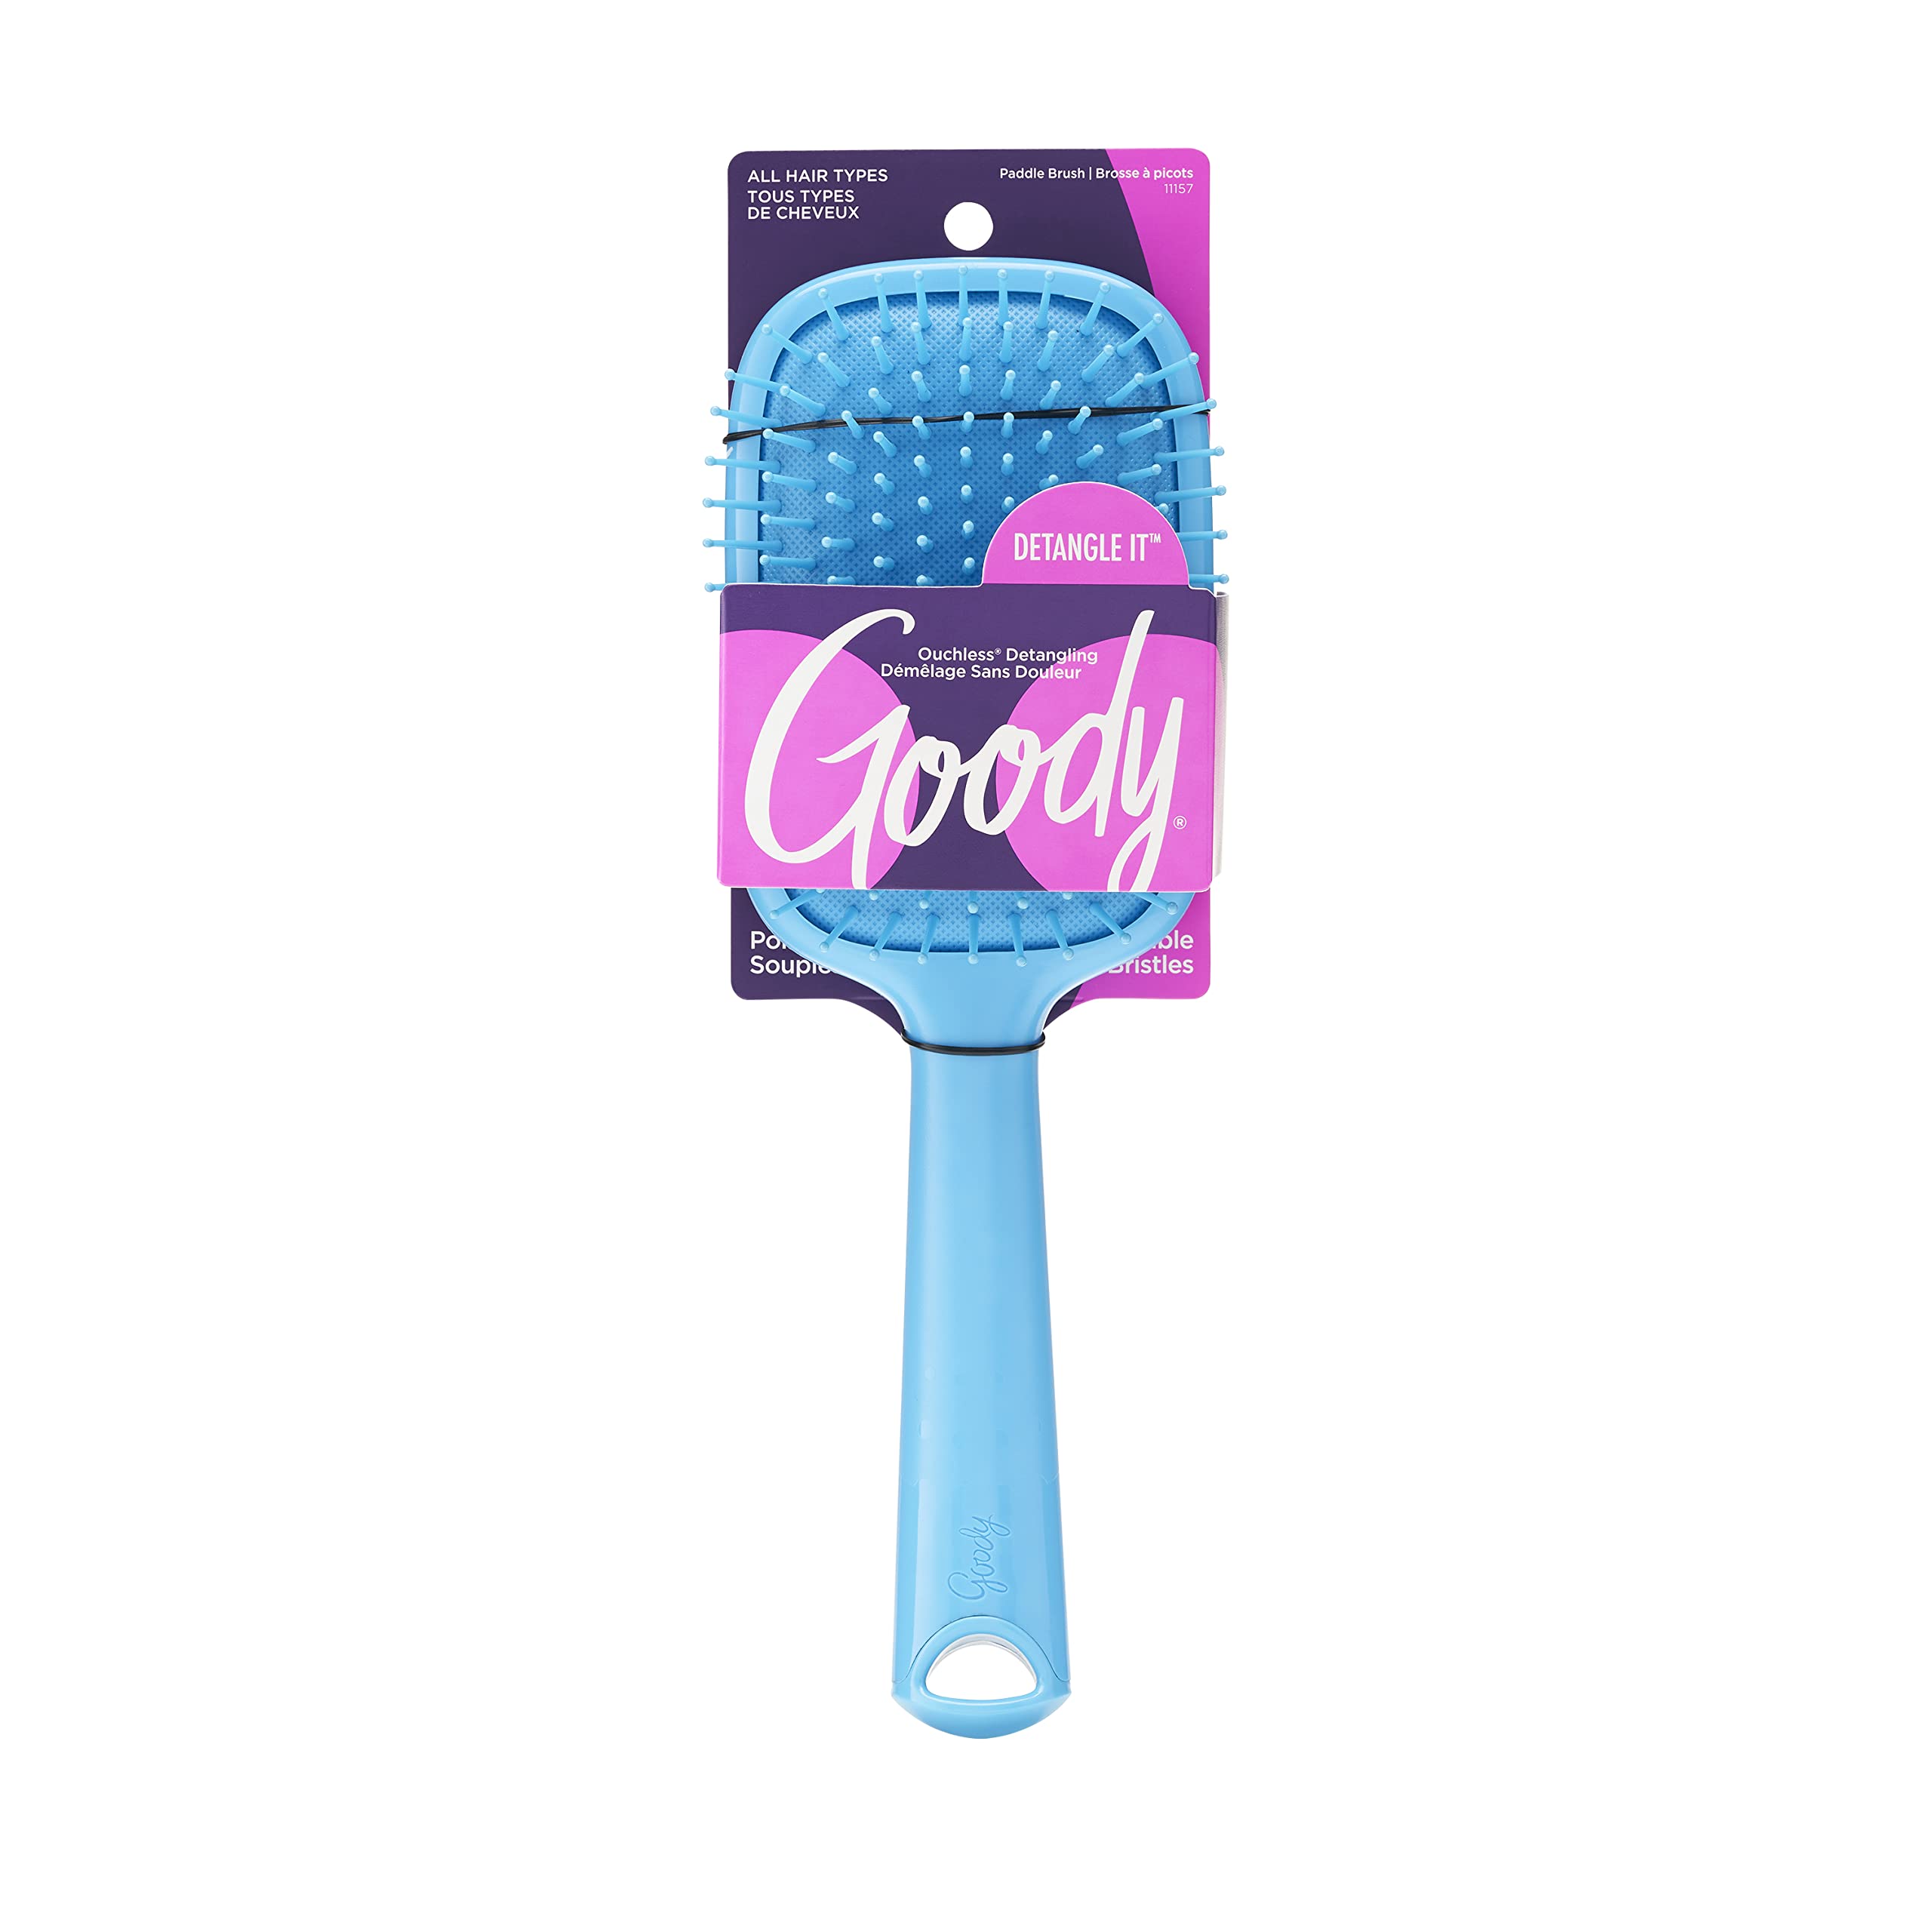 Goody Bright Boost Paddle Hair Brush, Assorted Colors